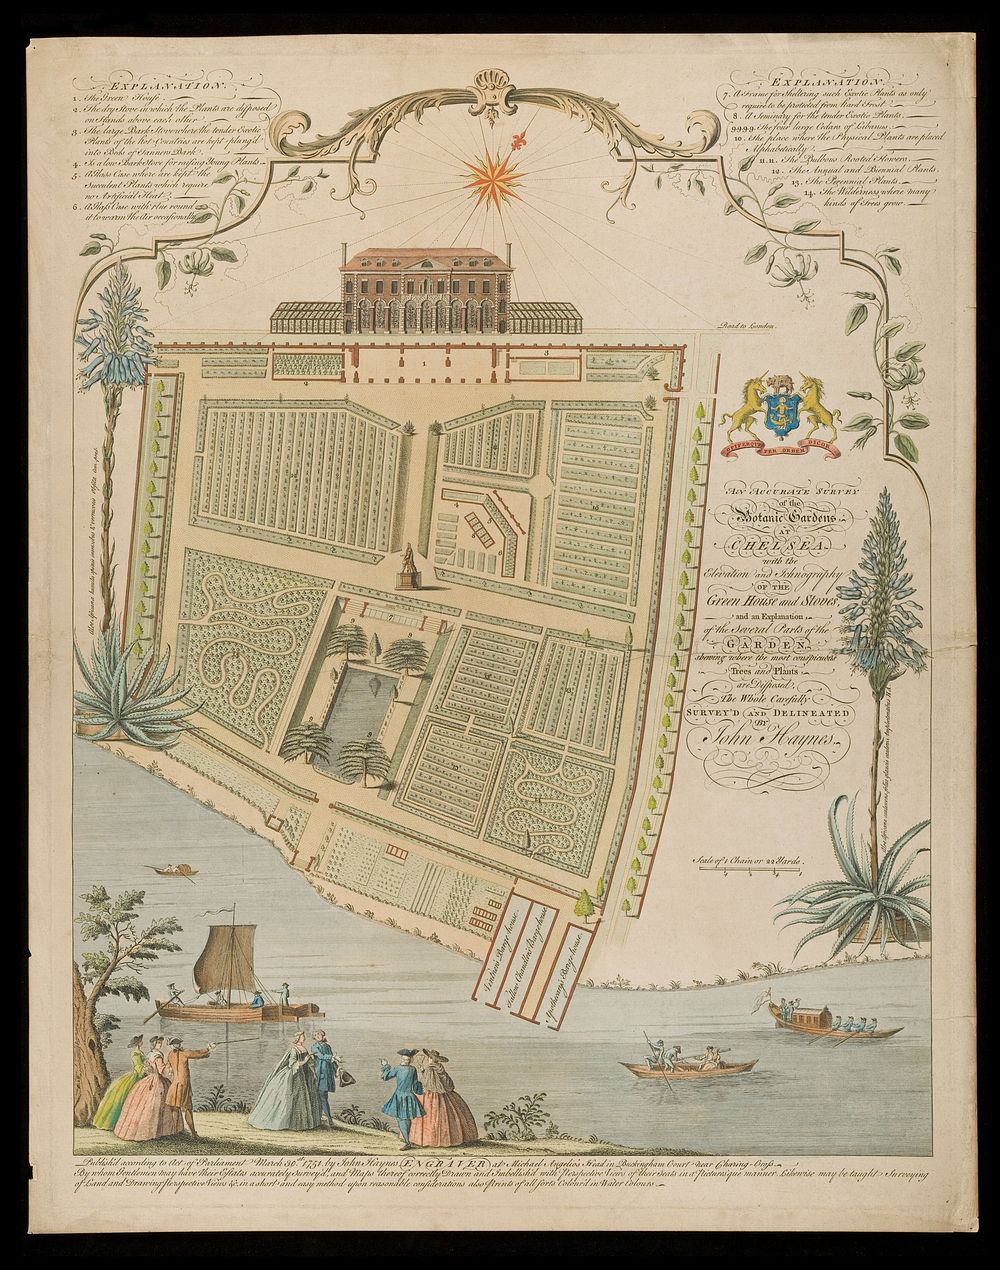 The Physic Garden, Chelsea: a plan view. Engraving by John Haynes, 1751.